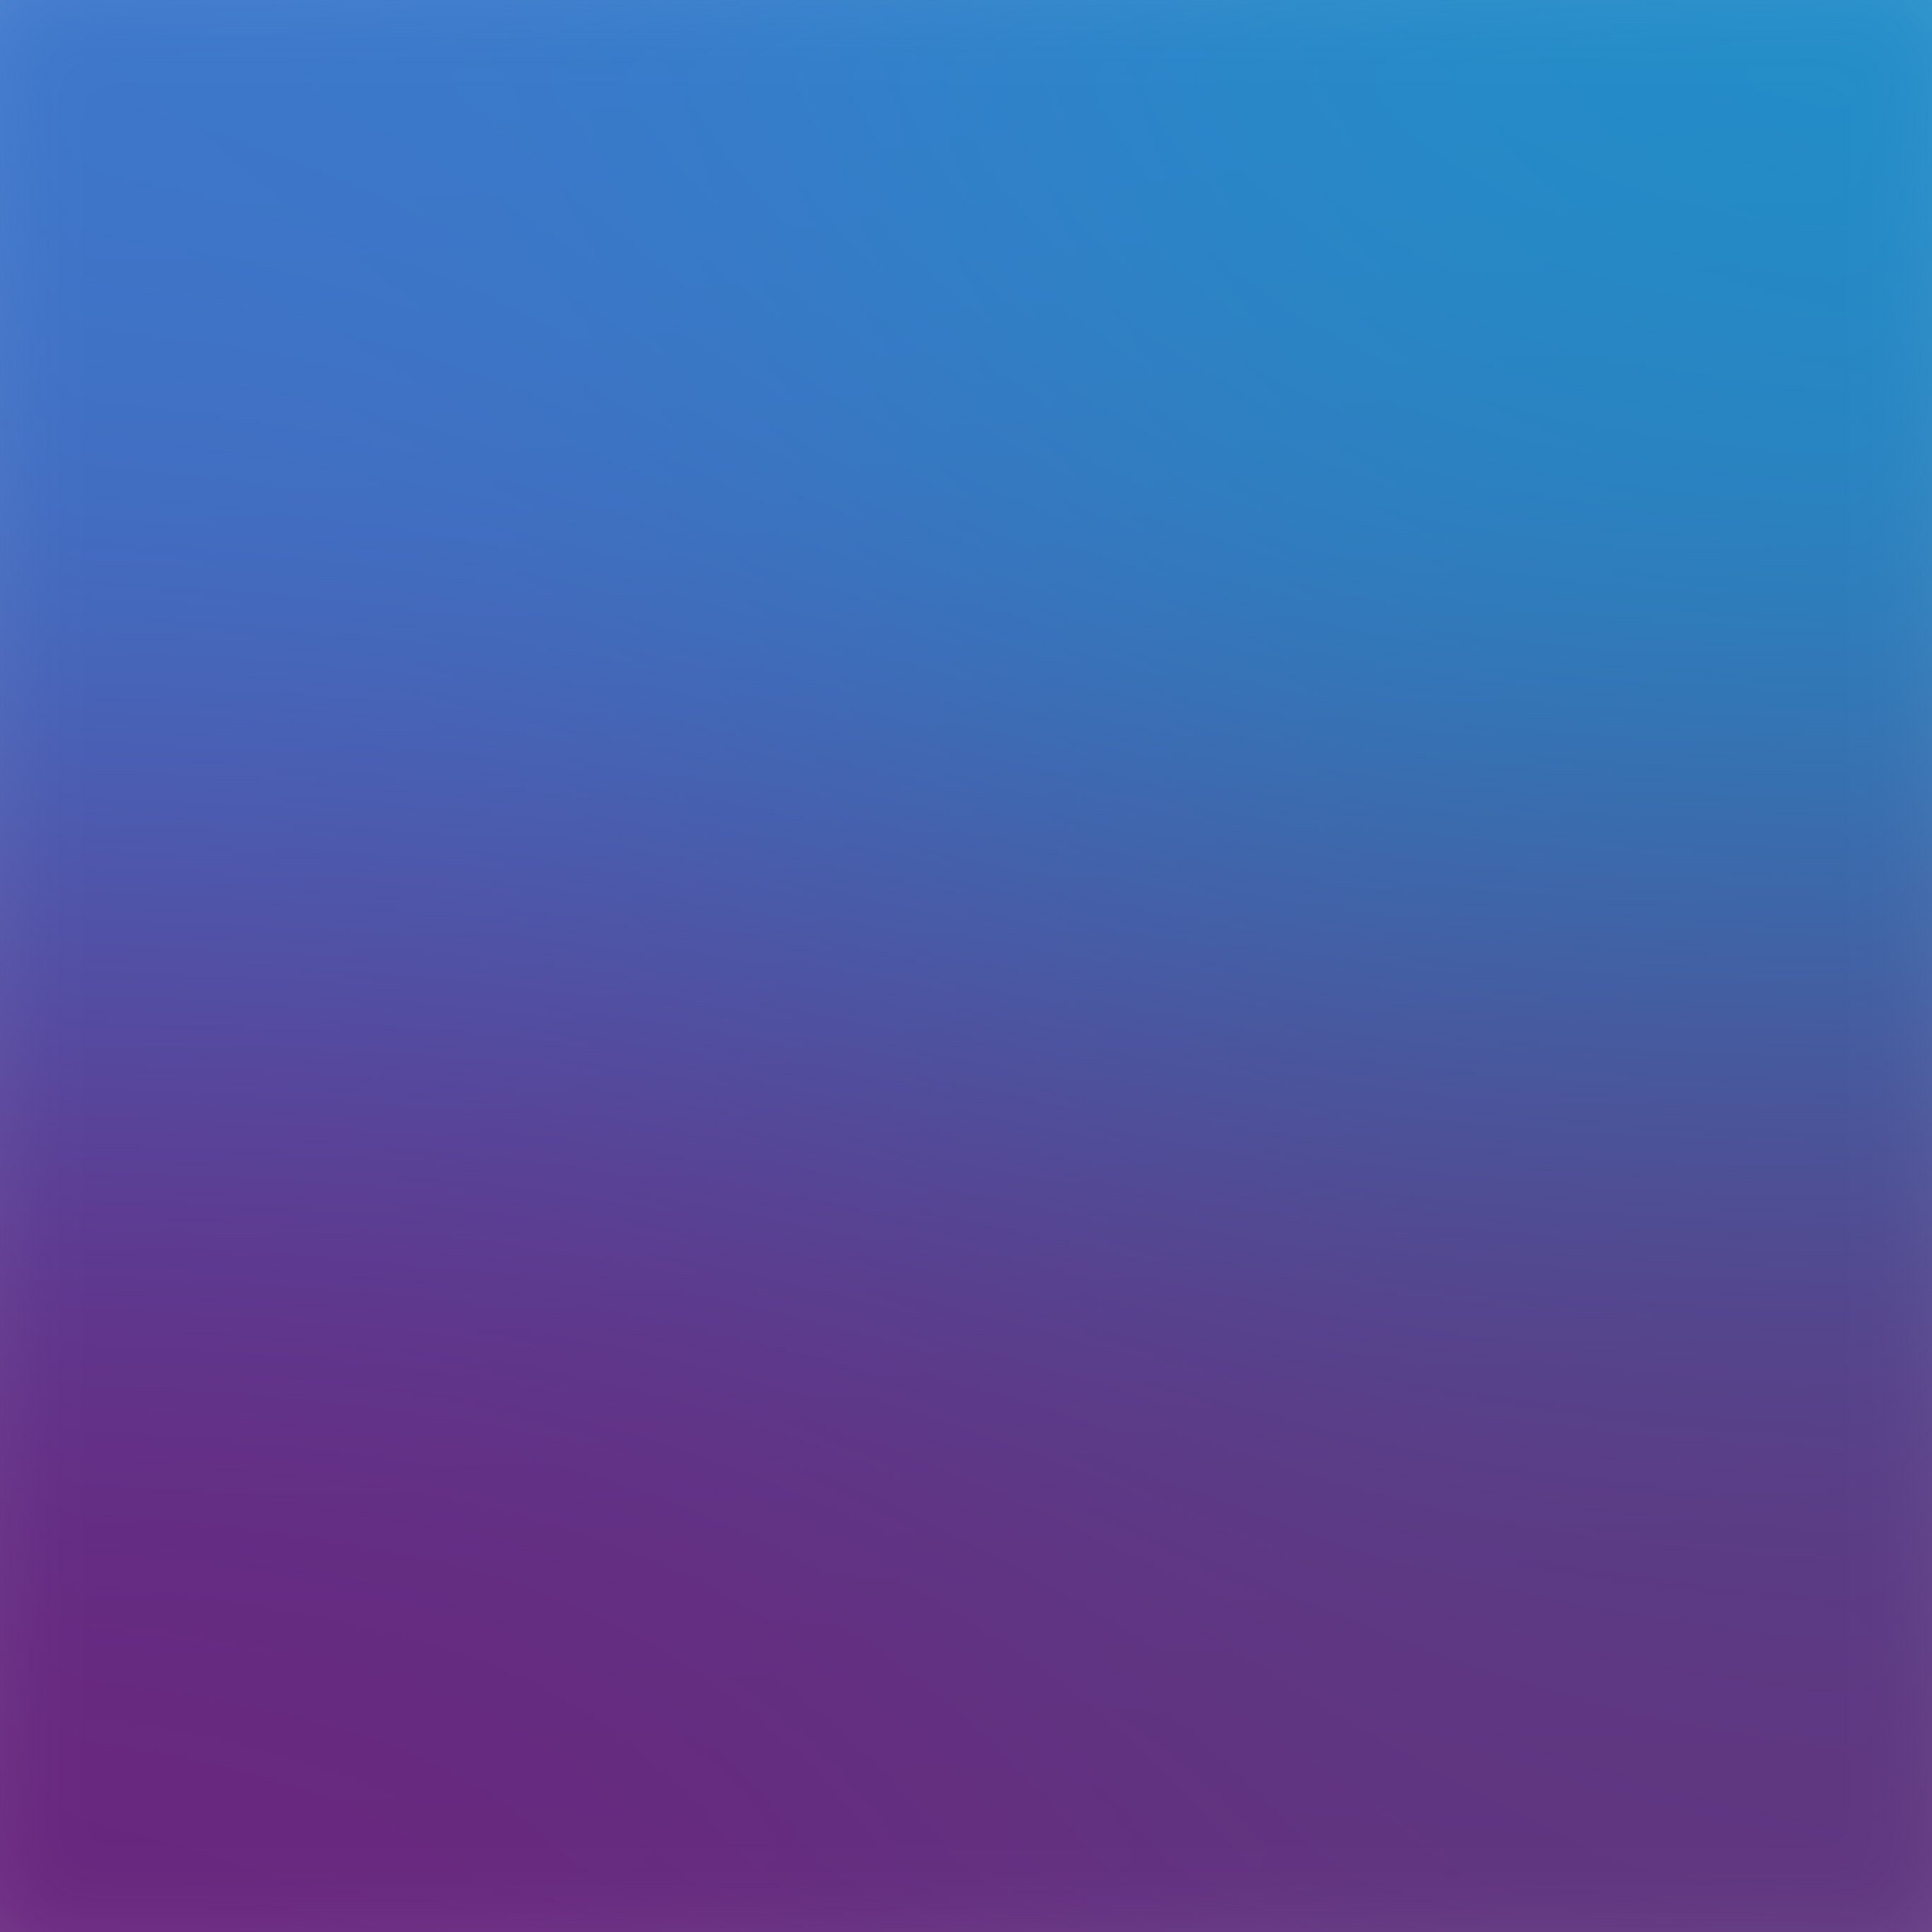 Blue And Purple Plain Background , HD Wallpaper & Backgrounds